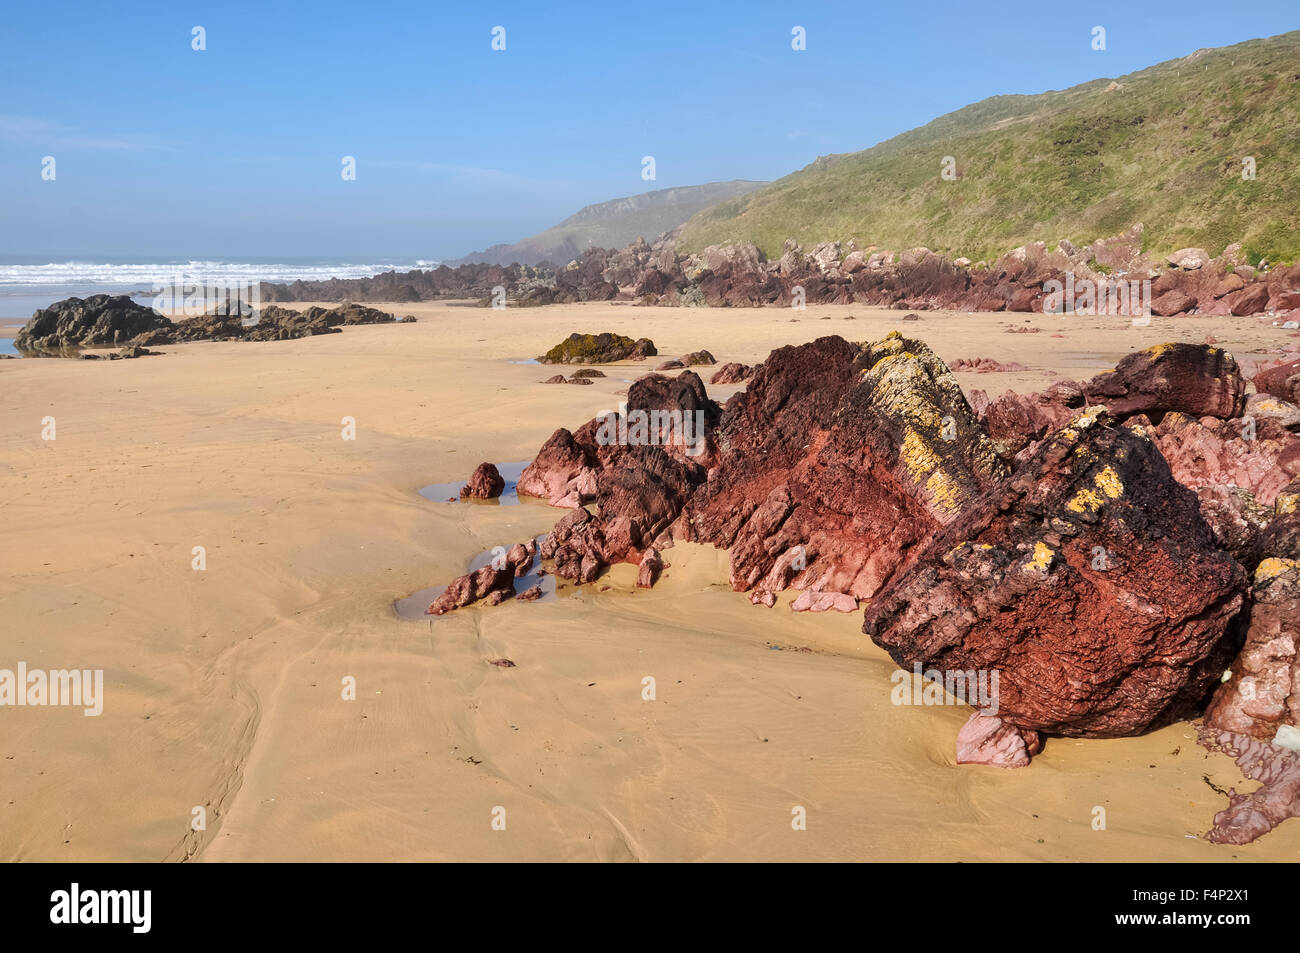 Beautiful beach at Freshwater West in Pembrokeshire, Wales. A sunny morning on the beach with red rocks and sand exposed. Stock Photo